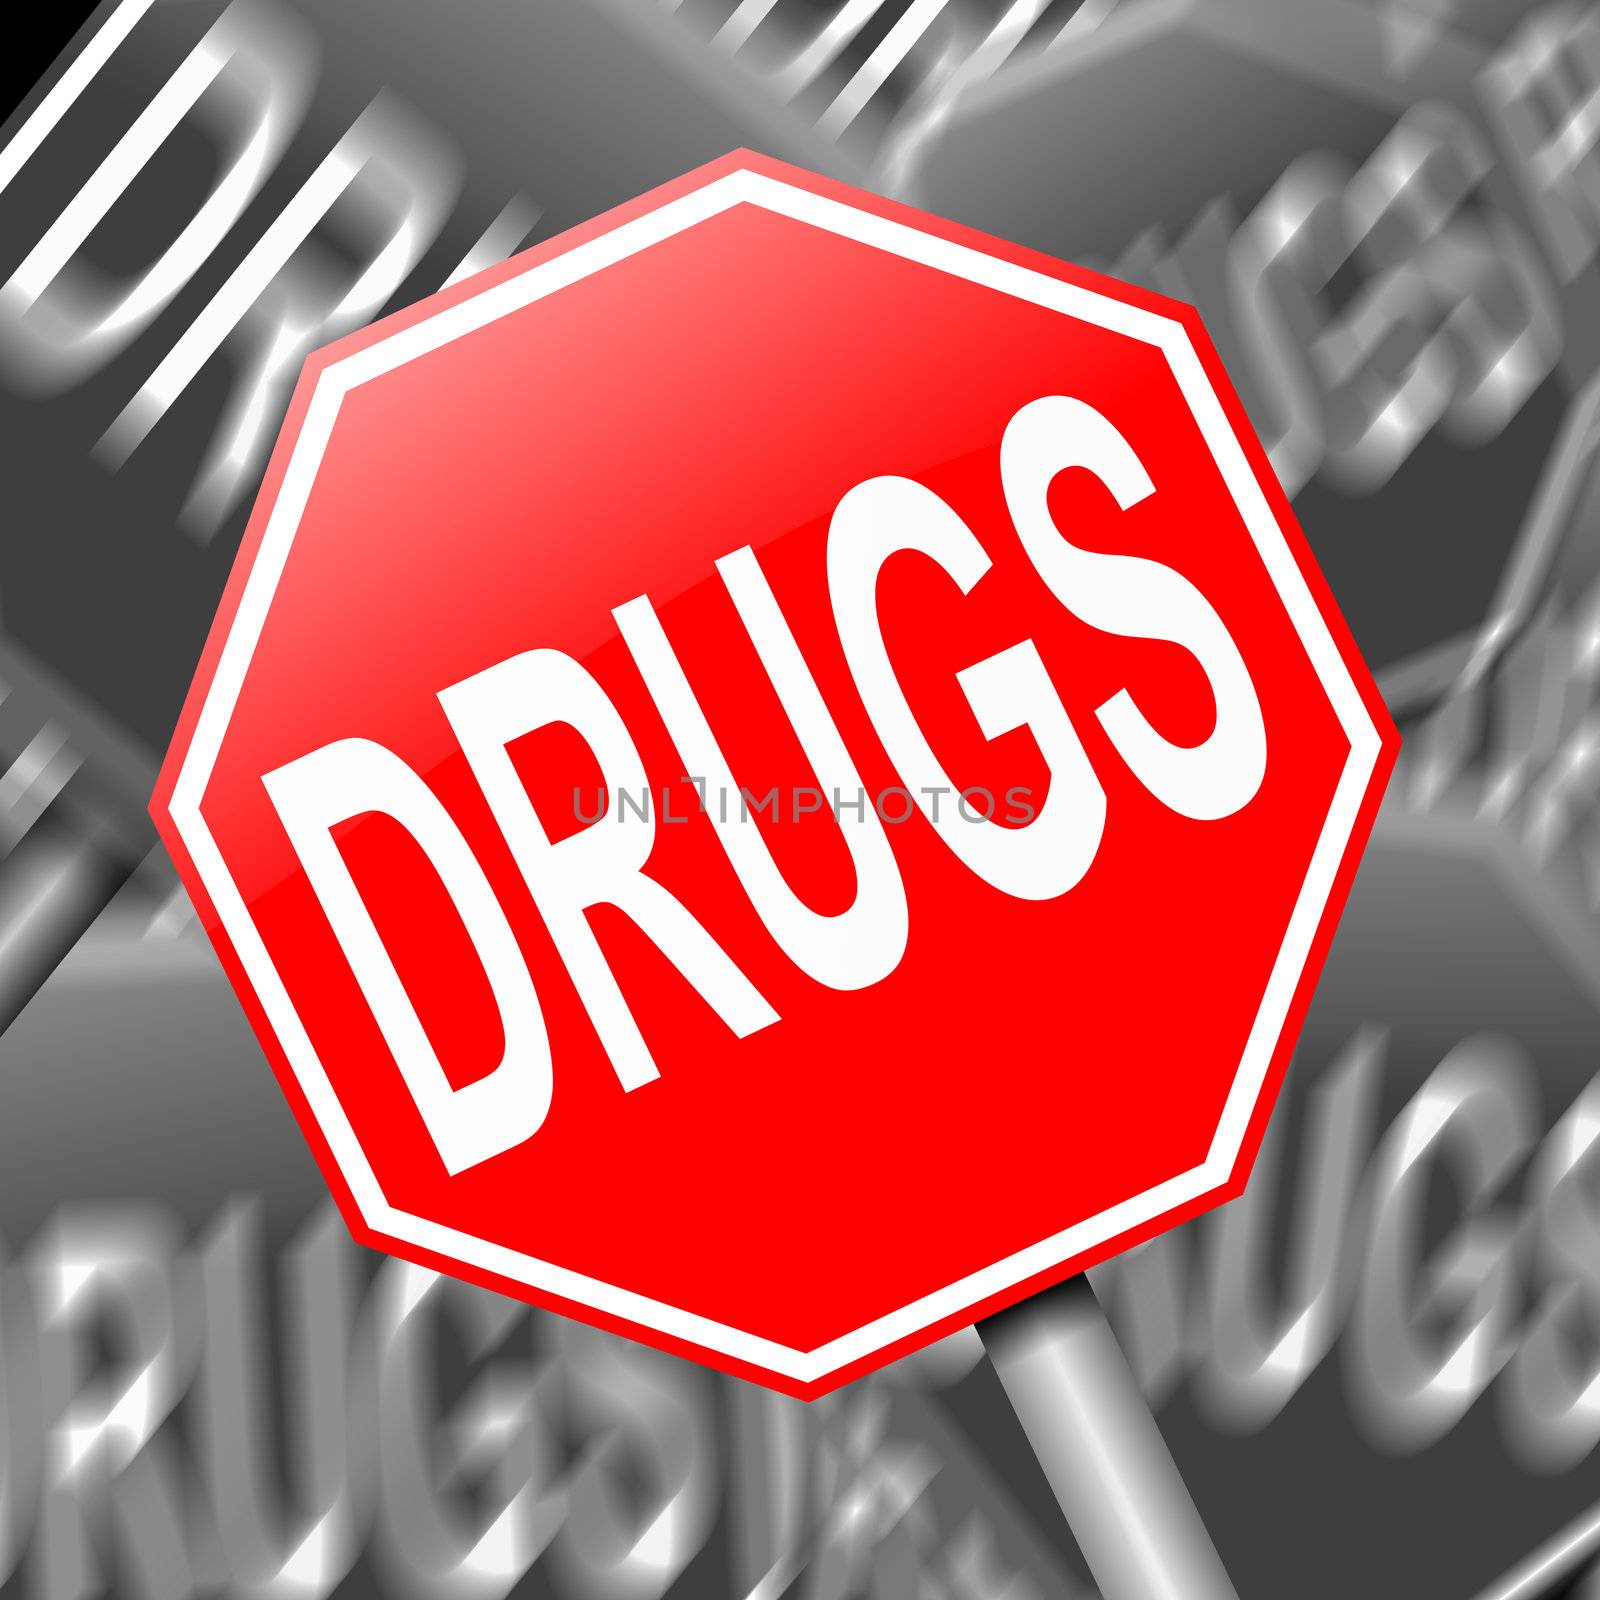 Abstract illustration depicting a sign with a drugs concept.